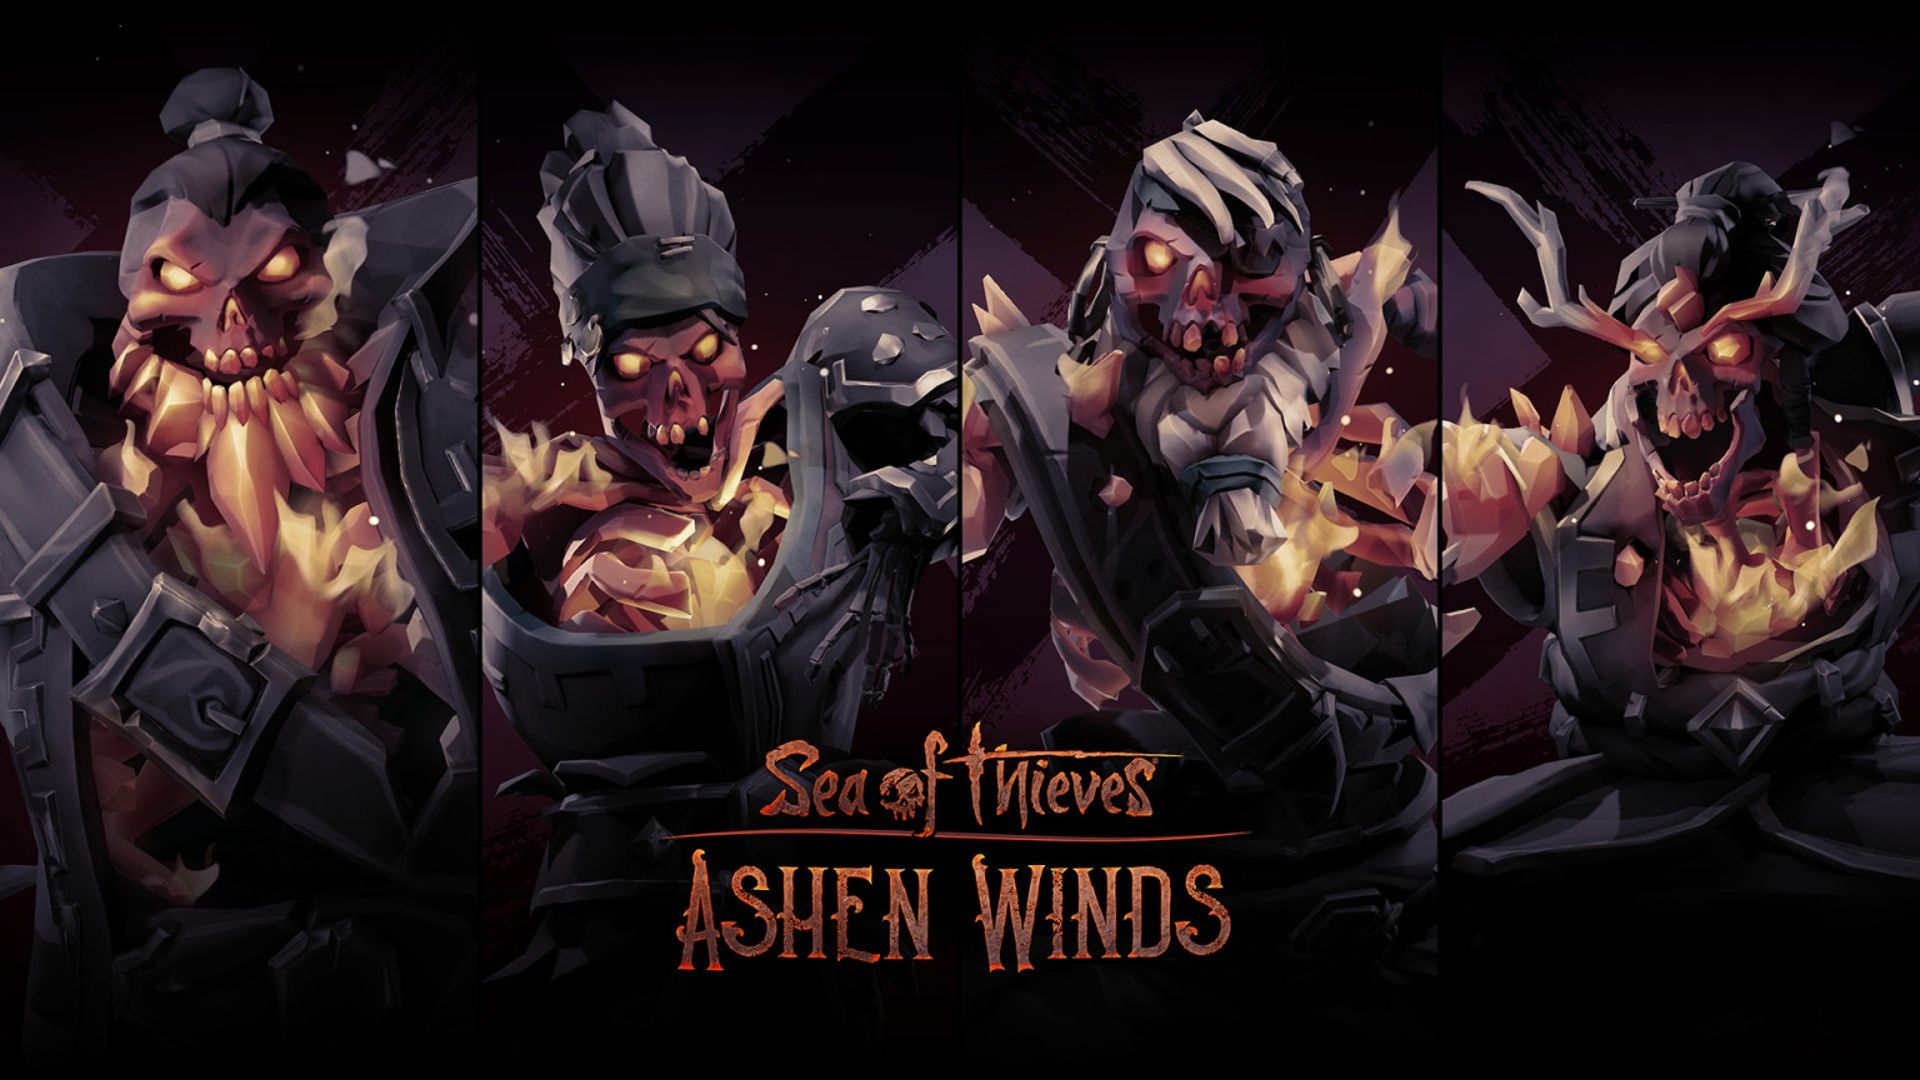 Sea of Thieves - Ashen Winds